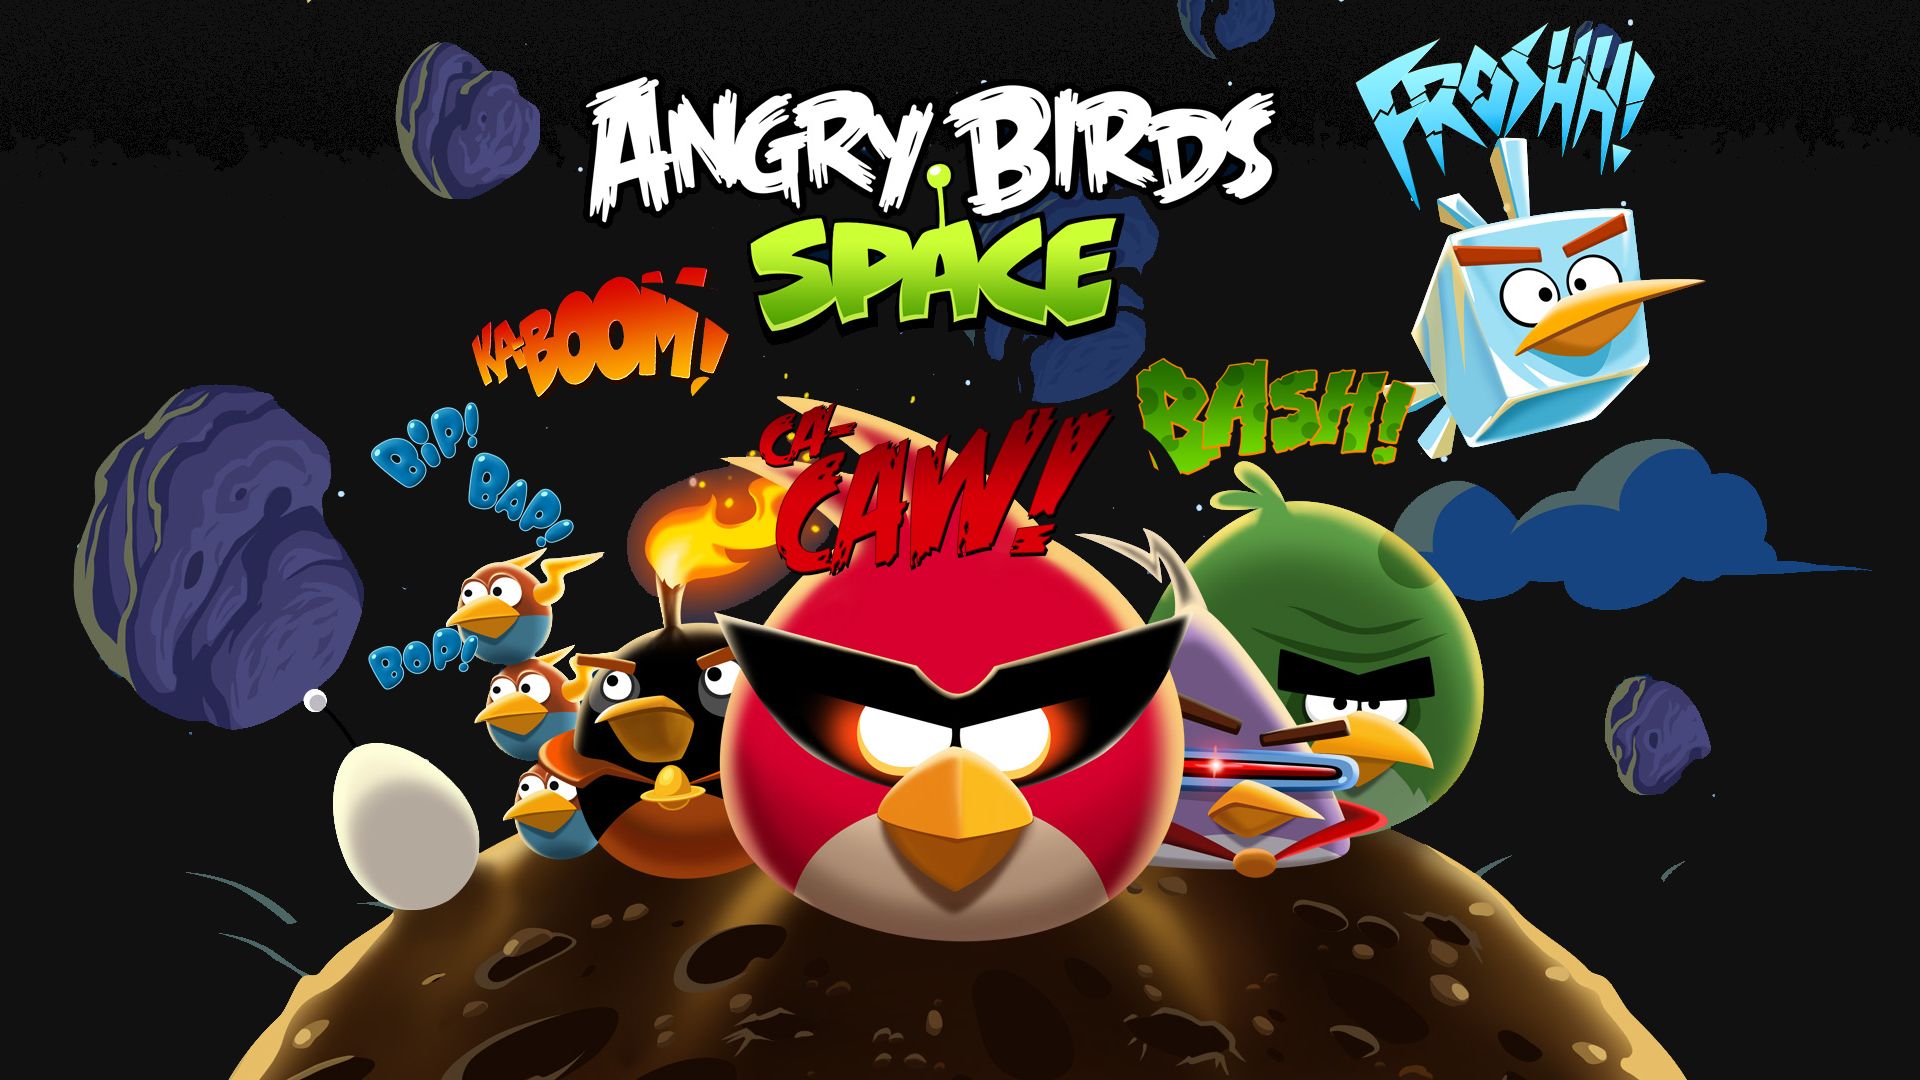 angry birds, video game, angry birds space, bird, game